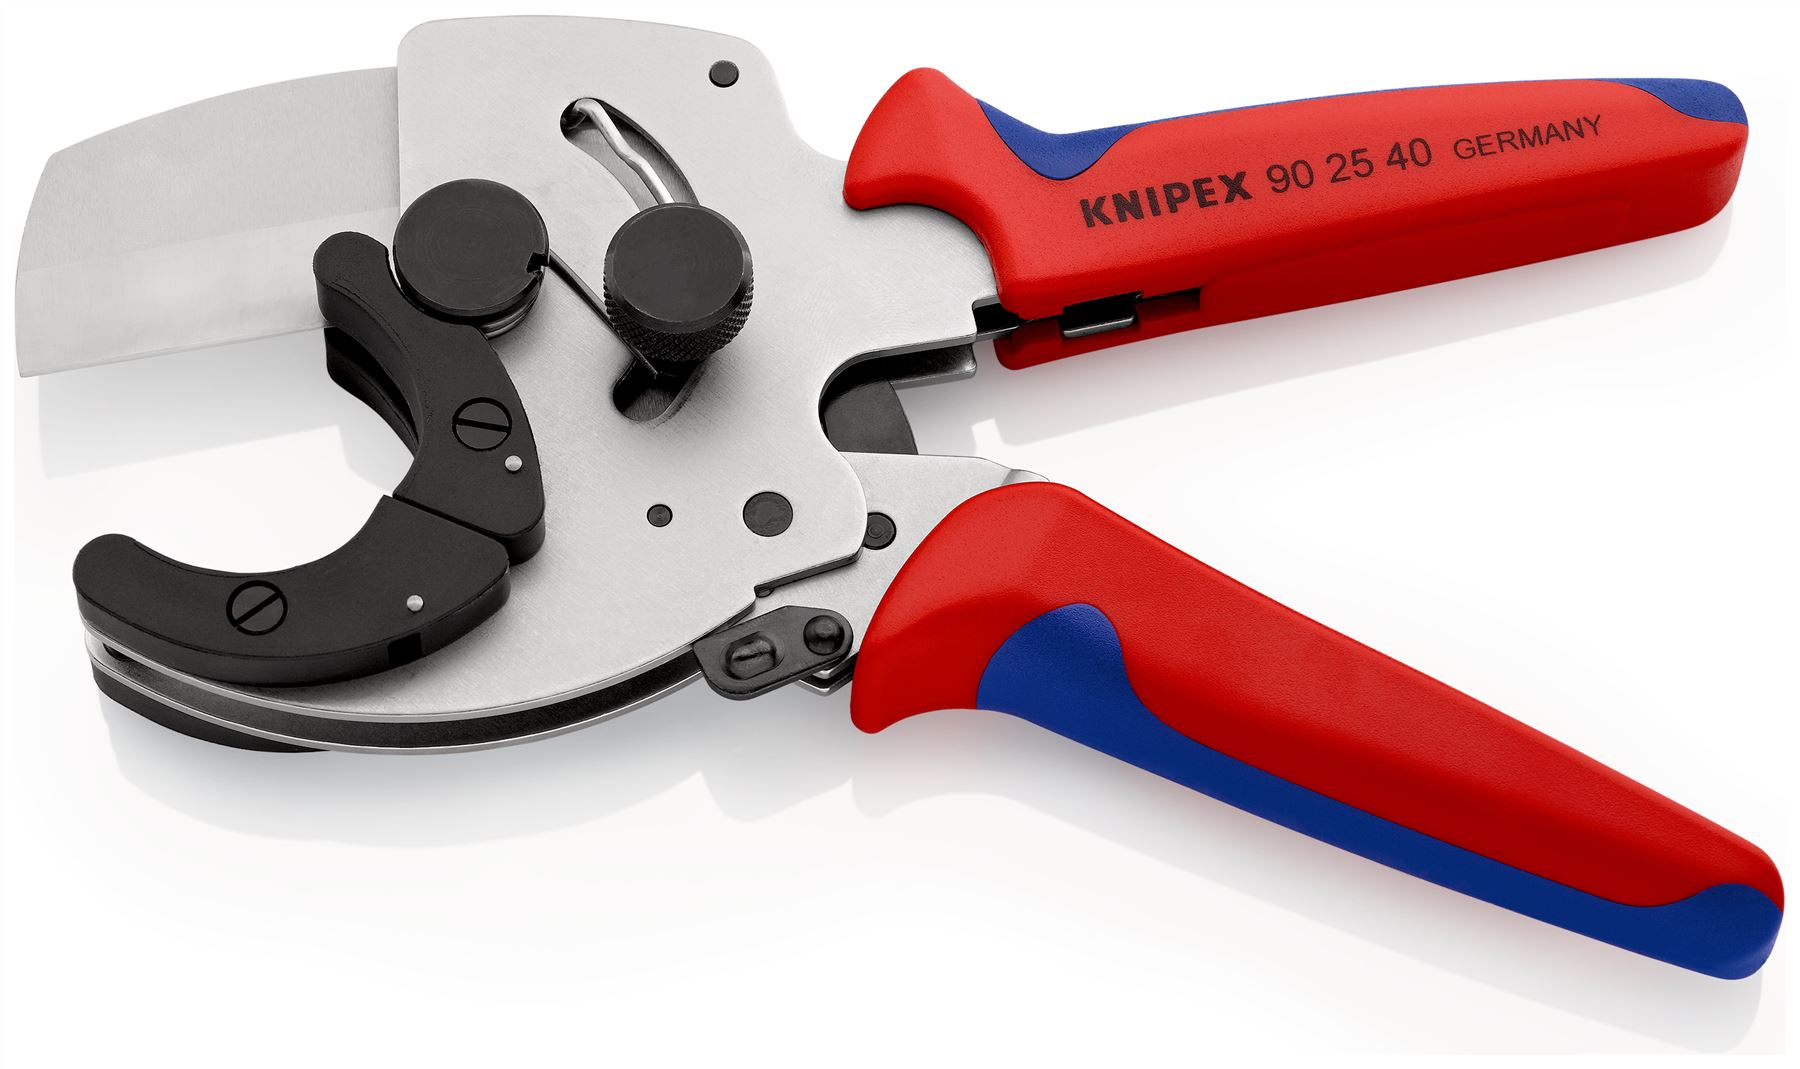 KNIPEX Pipe Cutter for Composite and Plastic Pipes 40mm Capactiy Multi Component Grips 90 25 40